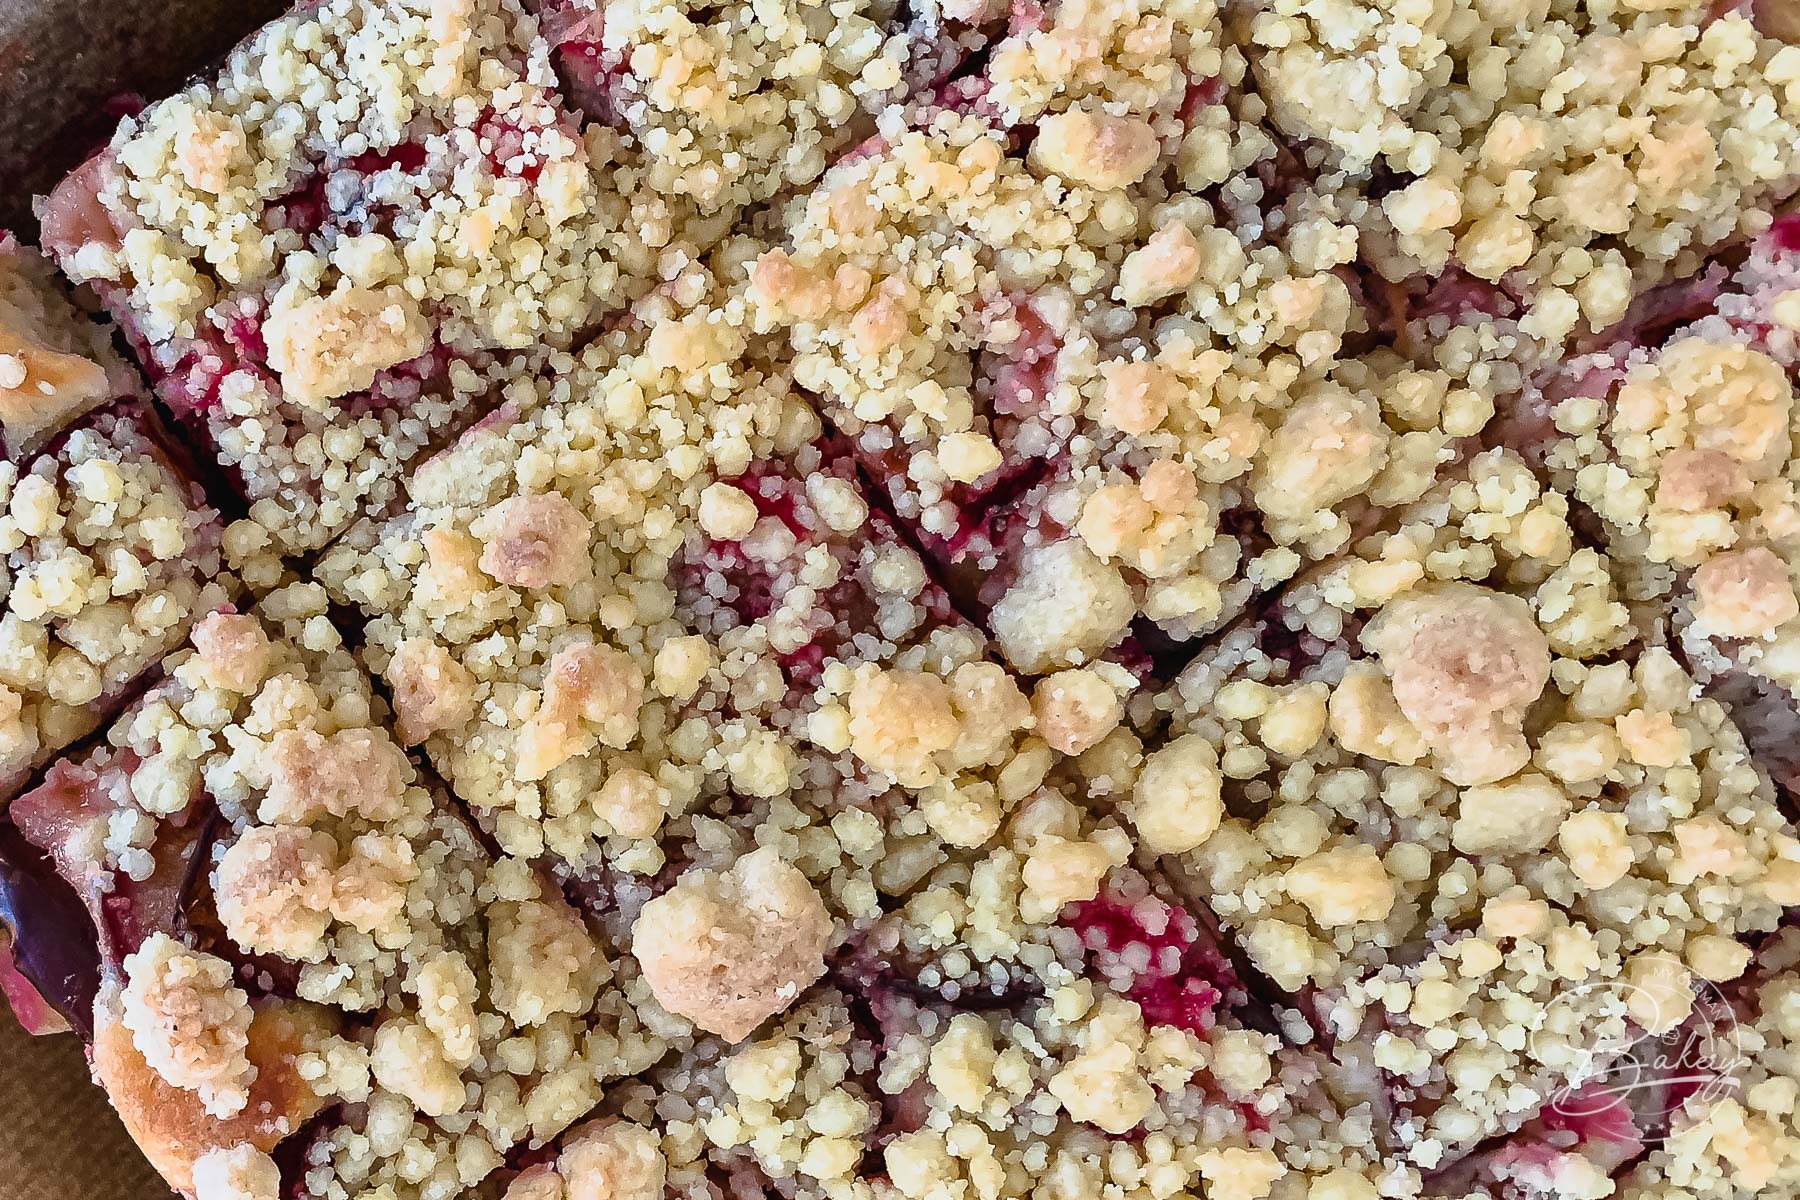 Plum crumble cake recipe - plum cake with yeast - Best plum cake as yeast cake - plum cake with yeast and crumble - perfect for summer - Delicious yeast cake recipe for plum crumble cake, plum cake with crumble. Quick, easy, step by step, plum cake.